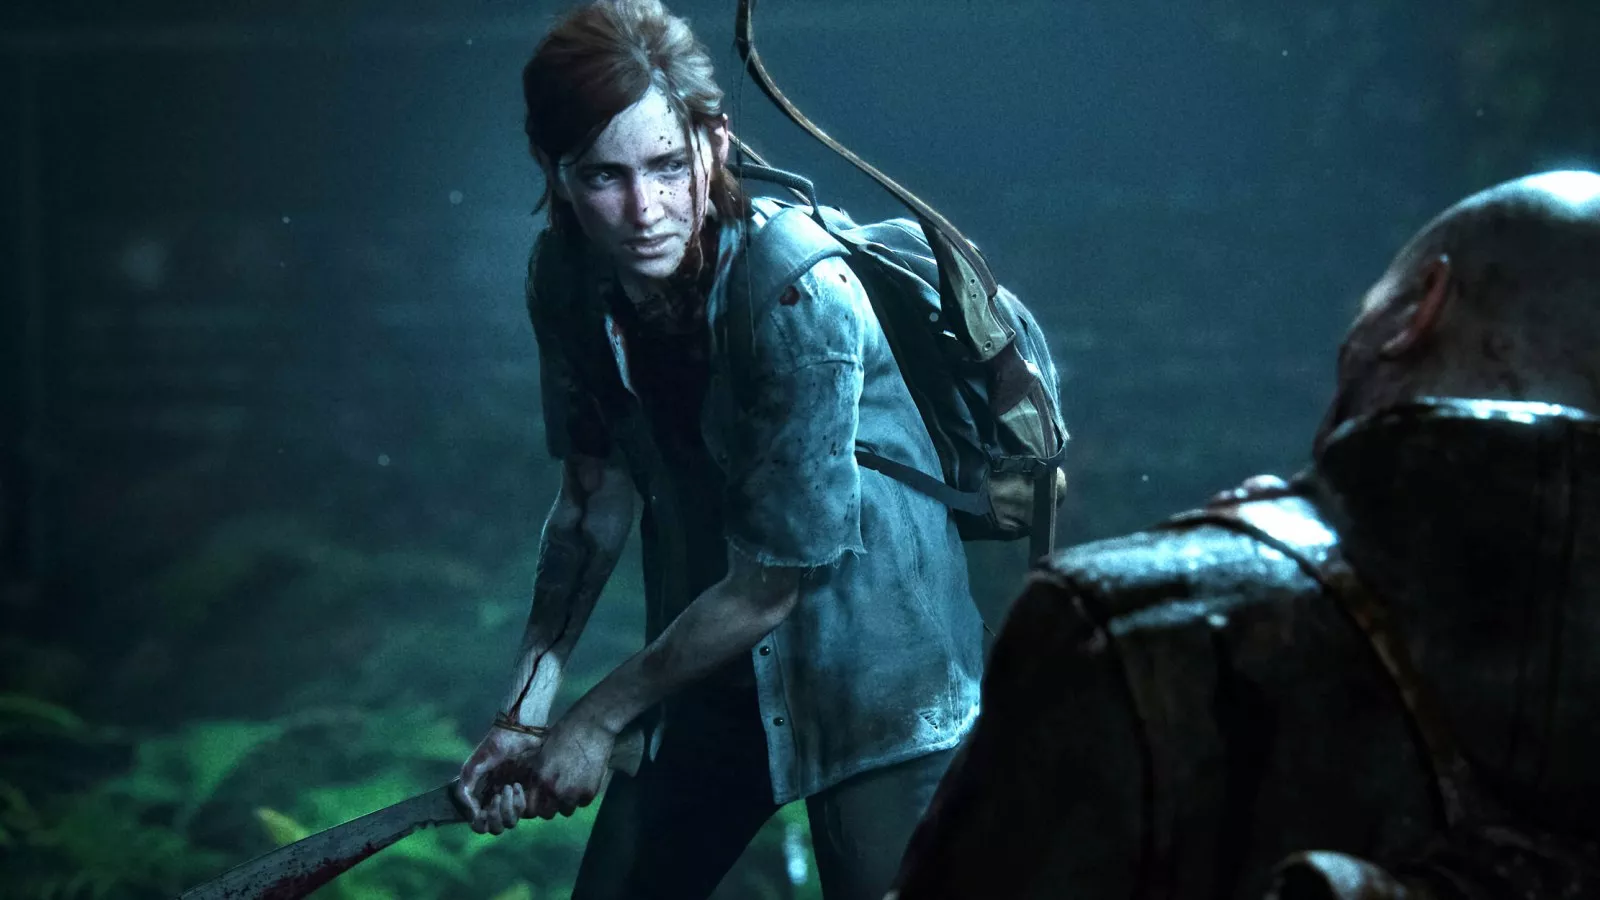 The Last of Us Part 2: How Naughty Dog Created One of the Best